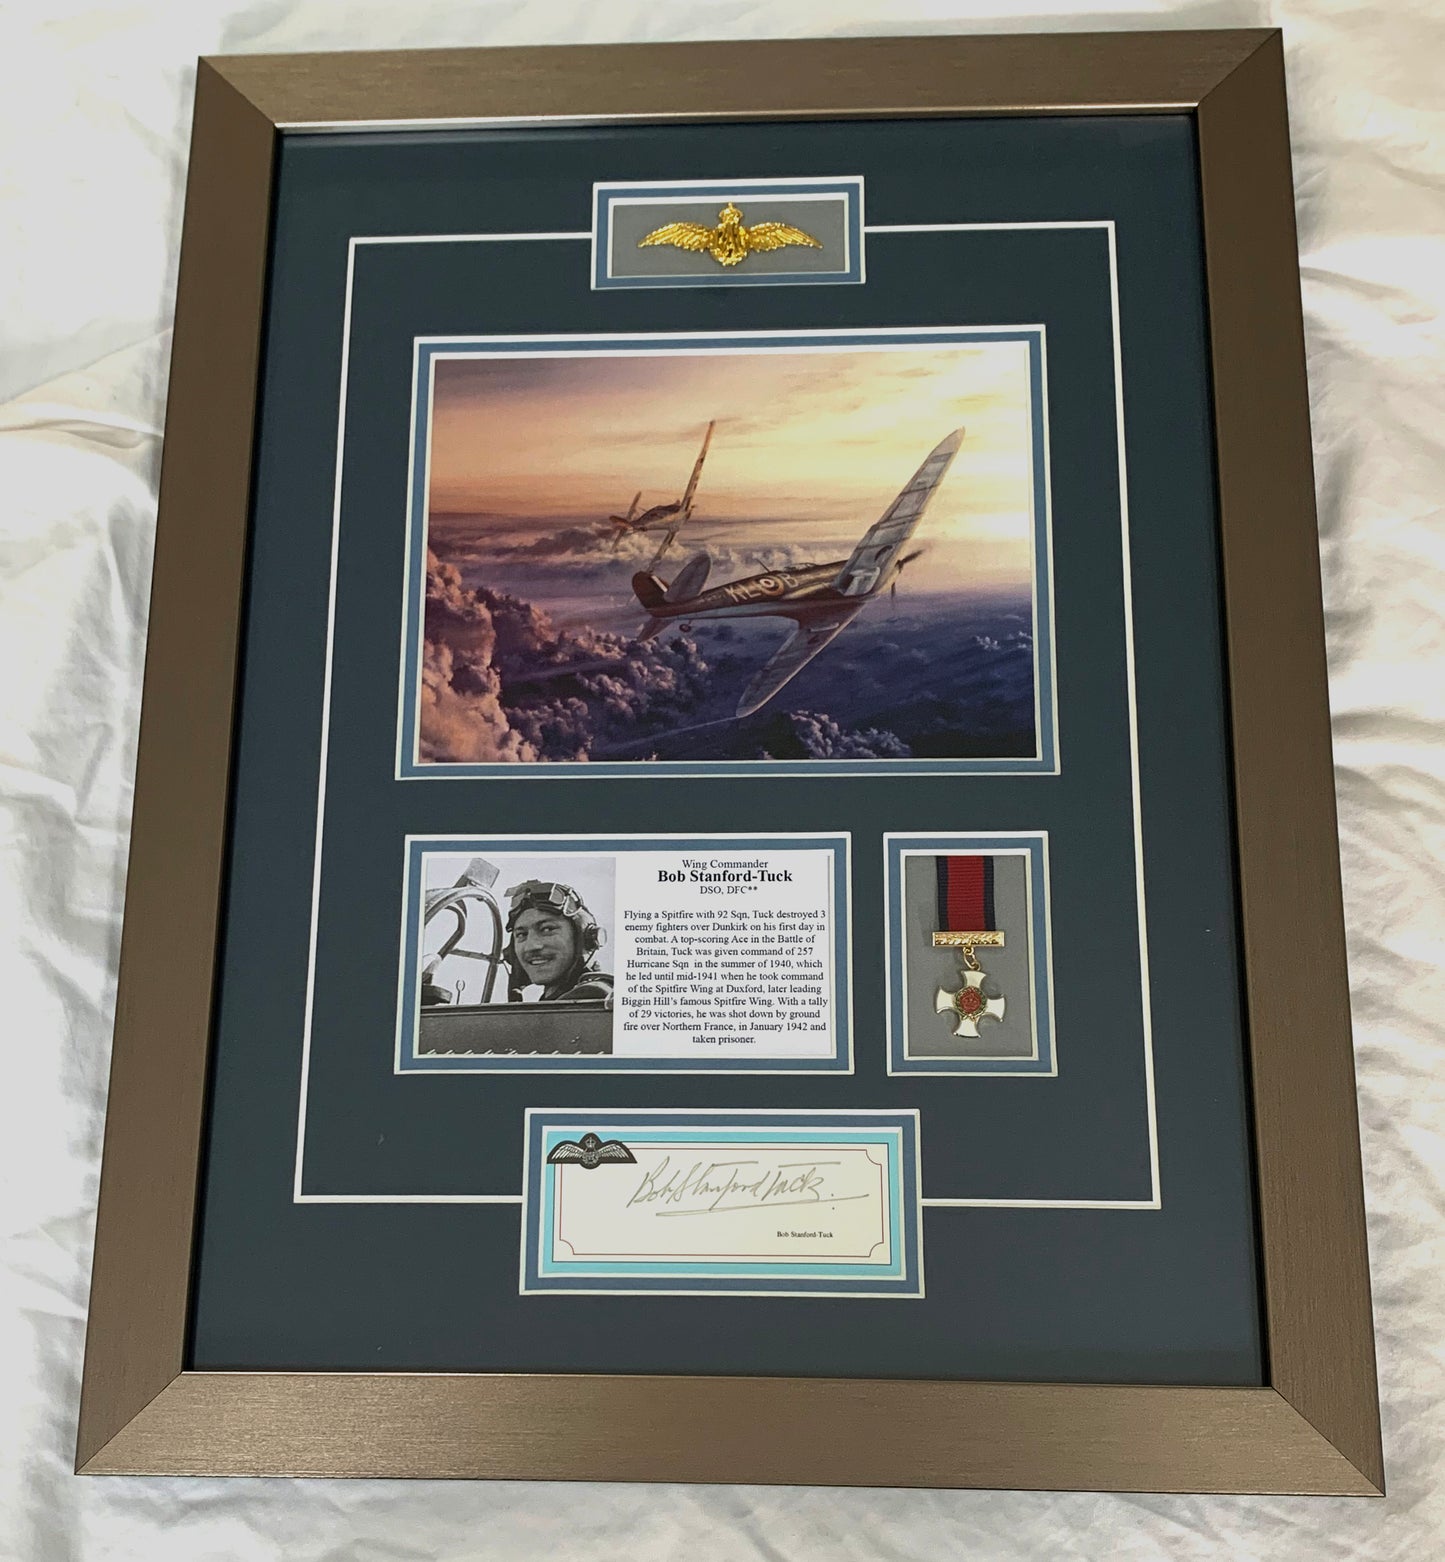 WW2 RAF Battle of Britain Ace Bob Stanford-Tuck Autographed Original Print Display - Fully Certified